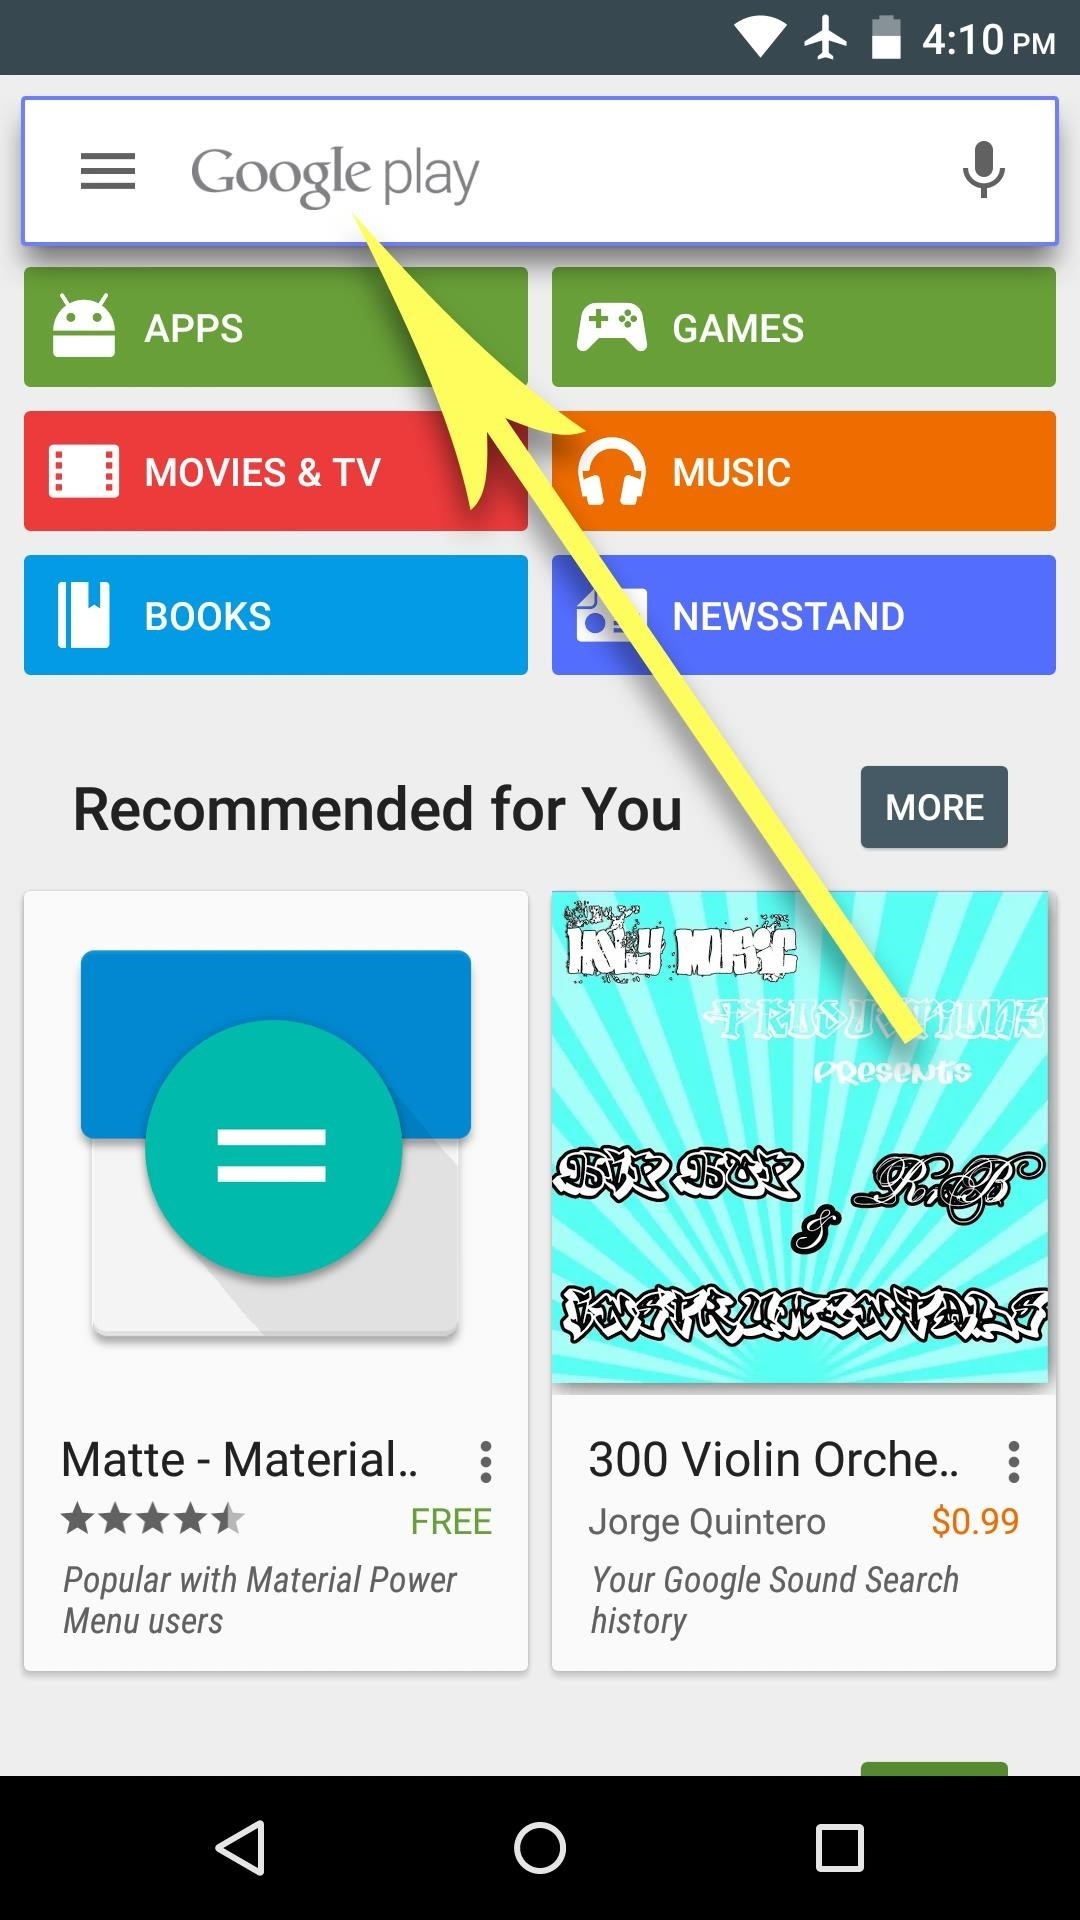 Go to the Google Play Store and search for the video player app.
Download and install the app again.